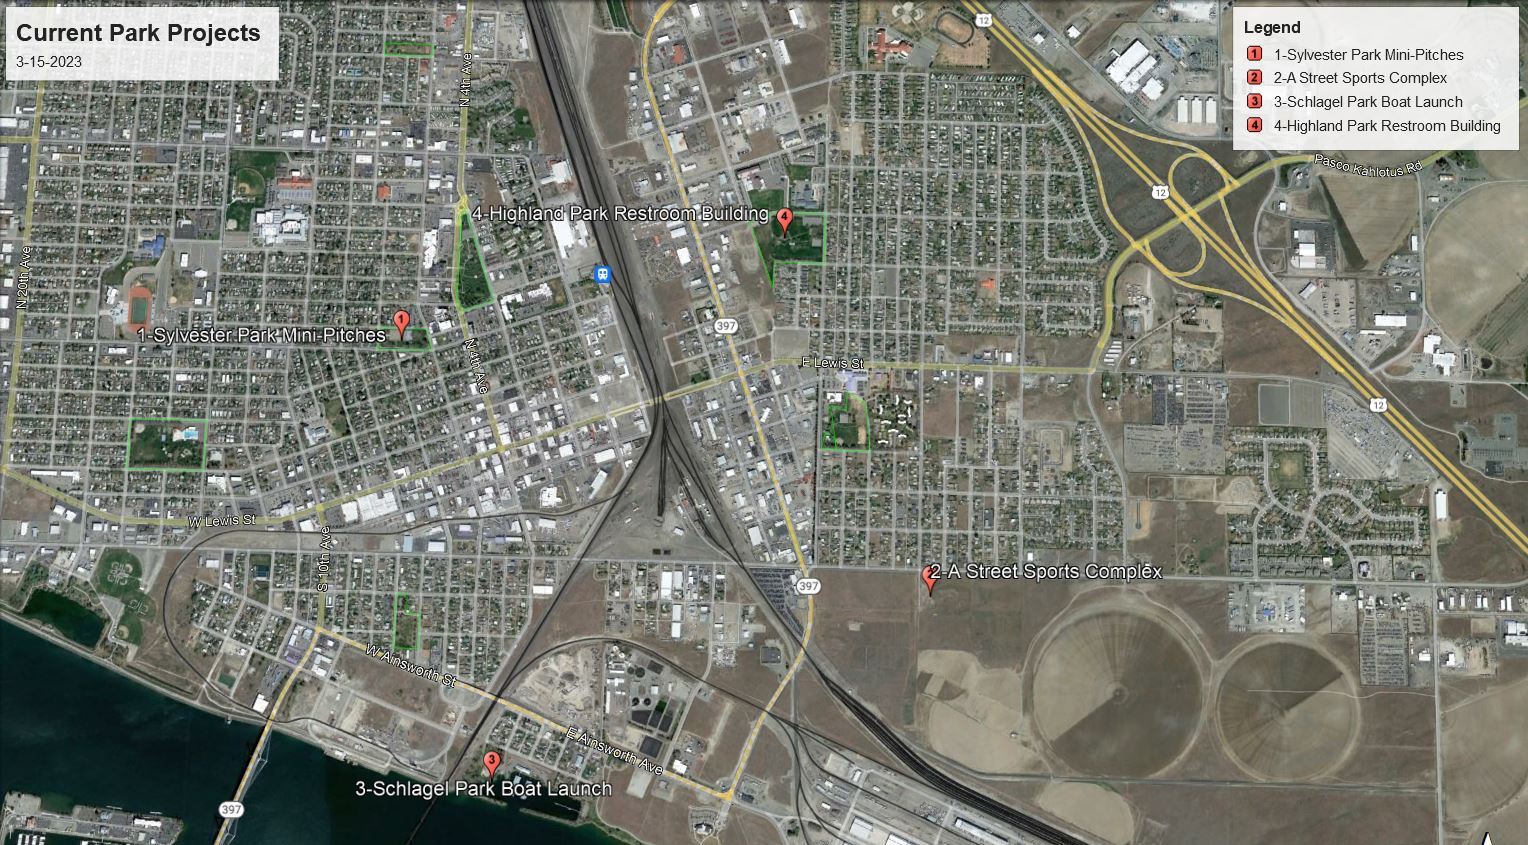 Map of Pasco with the locations of current park projects marked